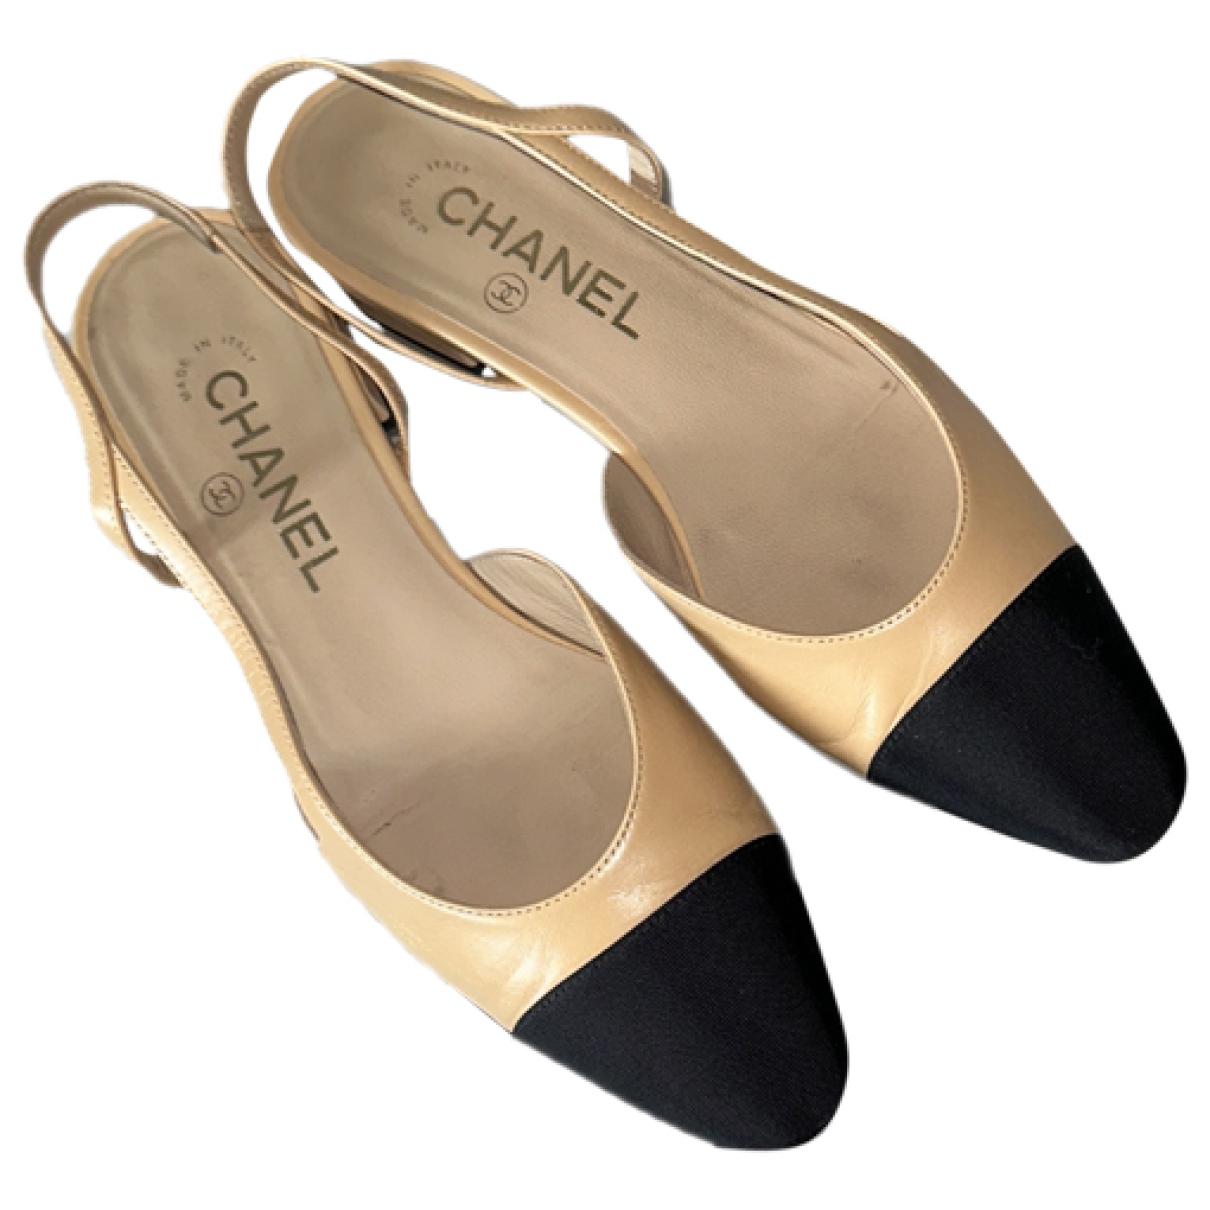 Leather ballet flats Chanel Beige size 36 EU in Leather - 33066891